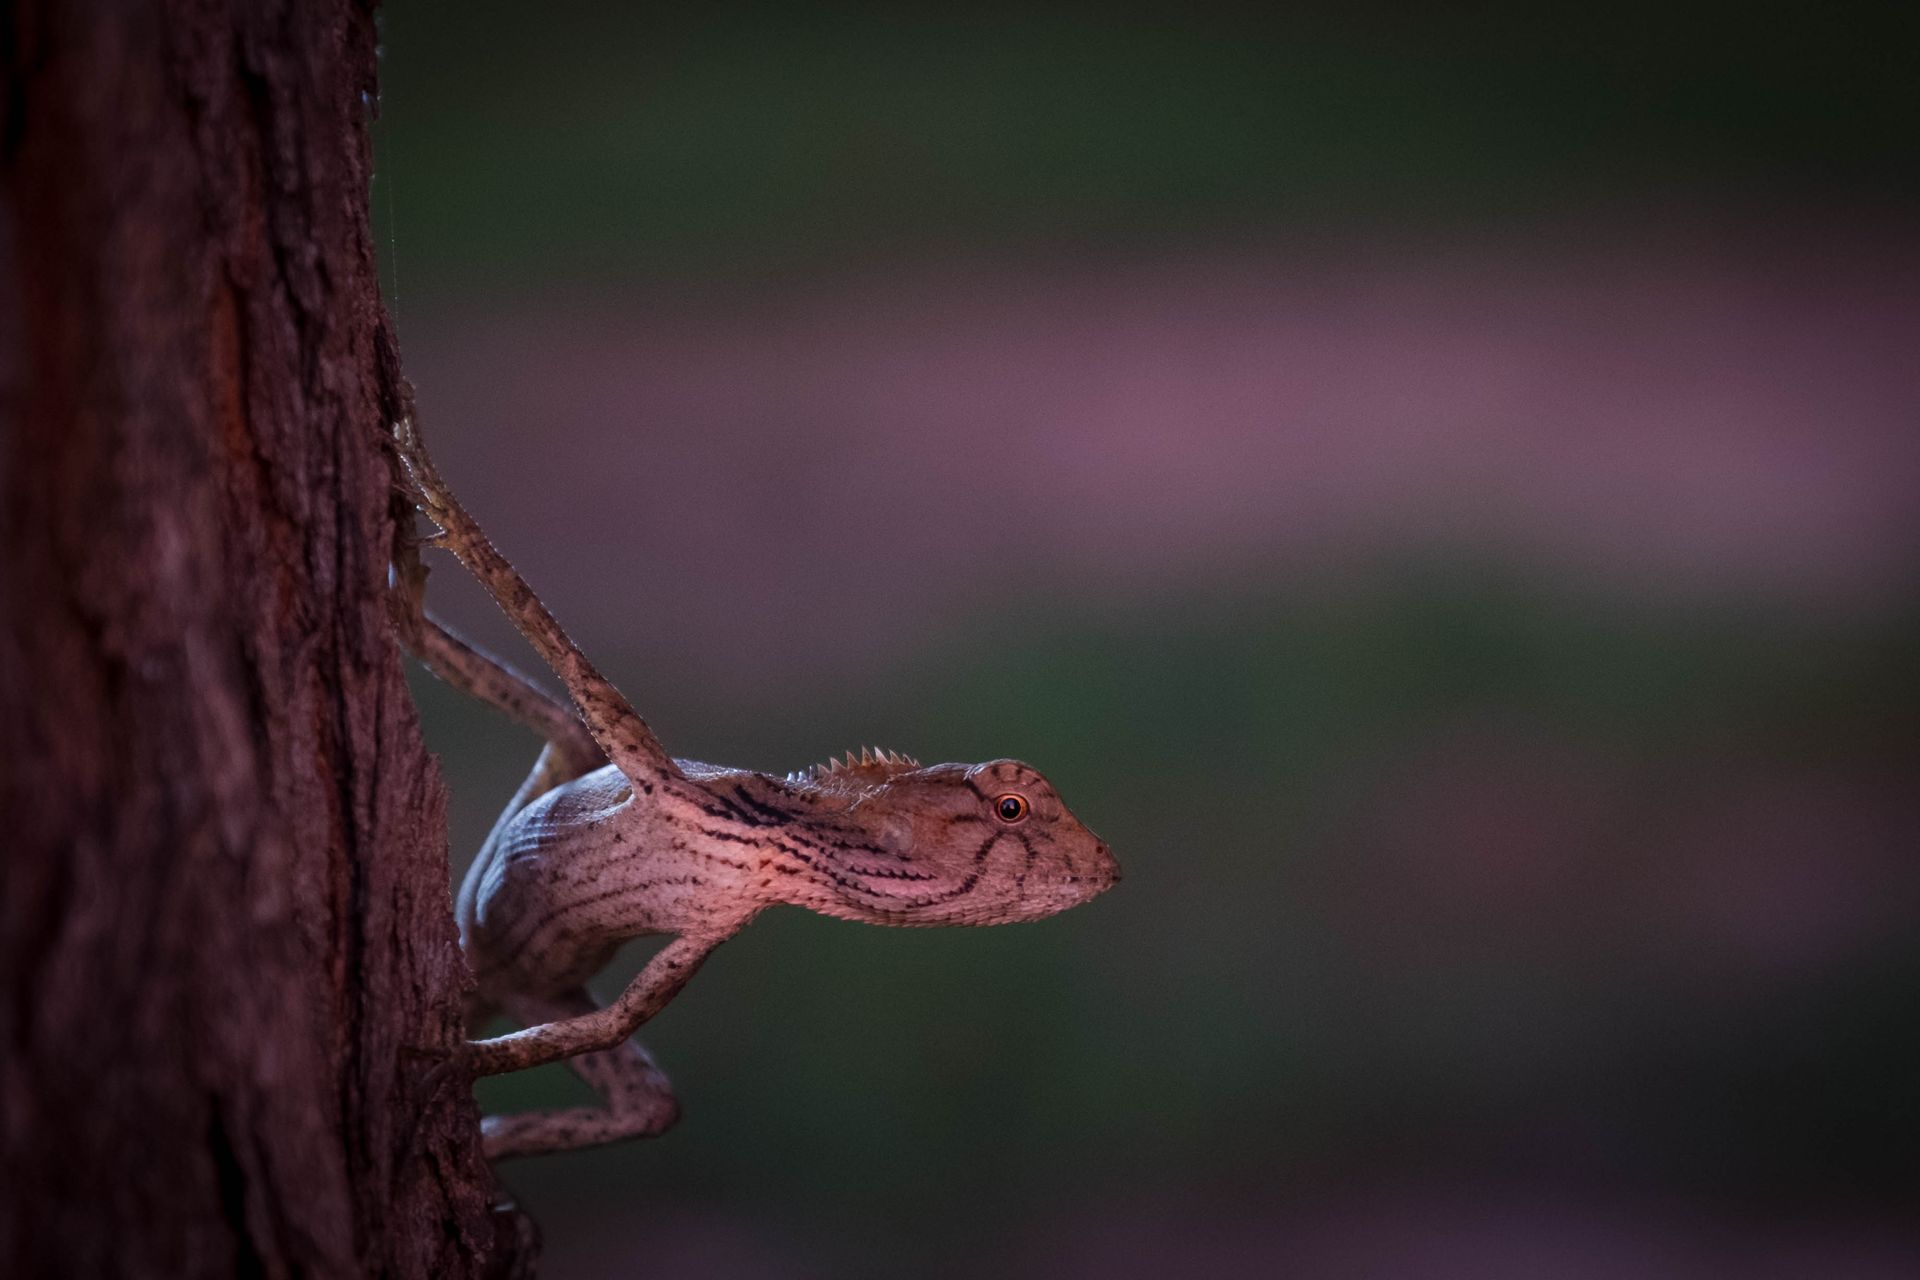 There are also many animals to admire on land, like this female Calotes Versicolor lizard.